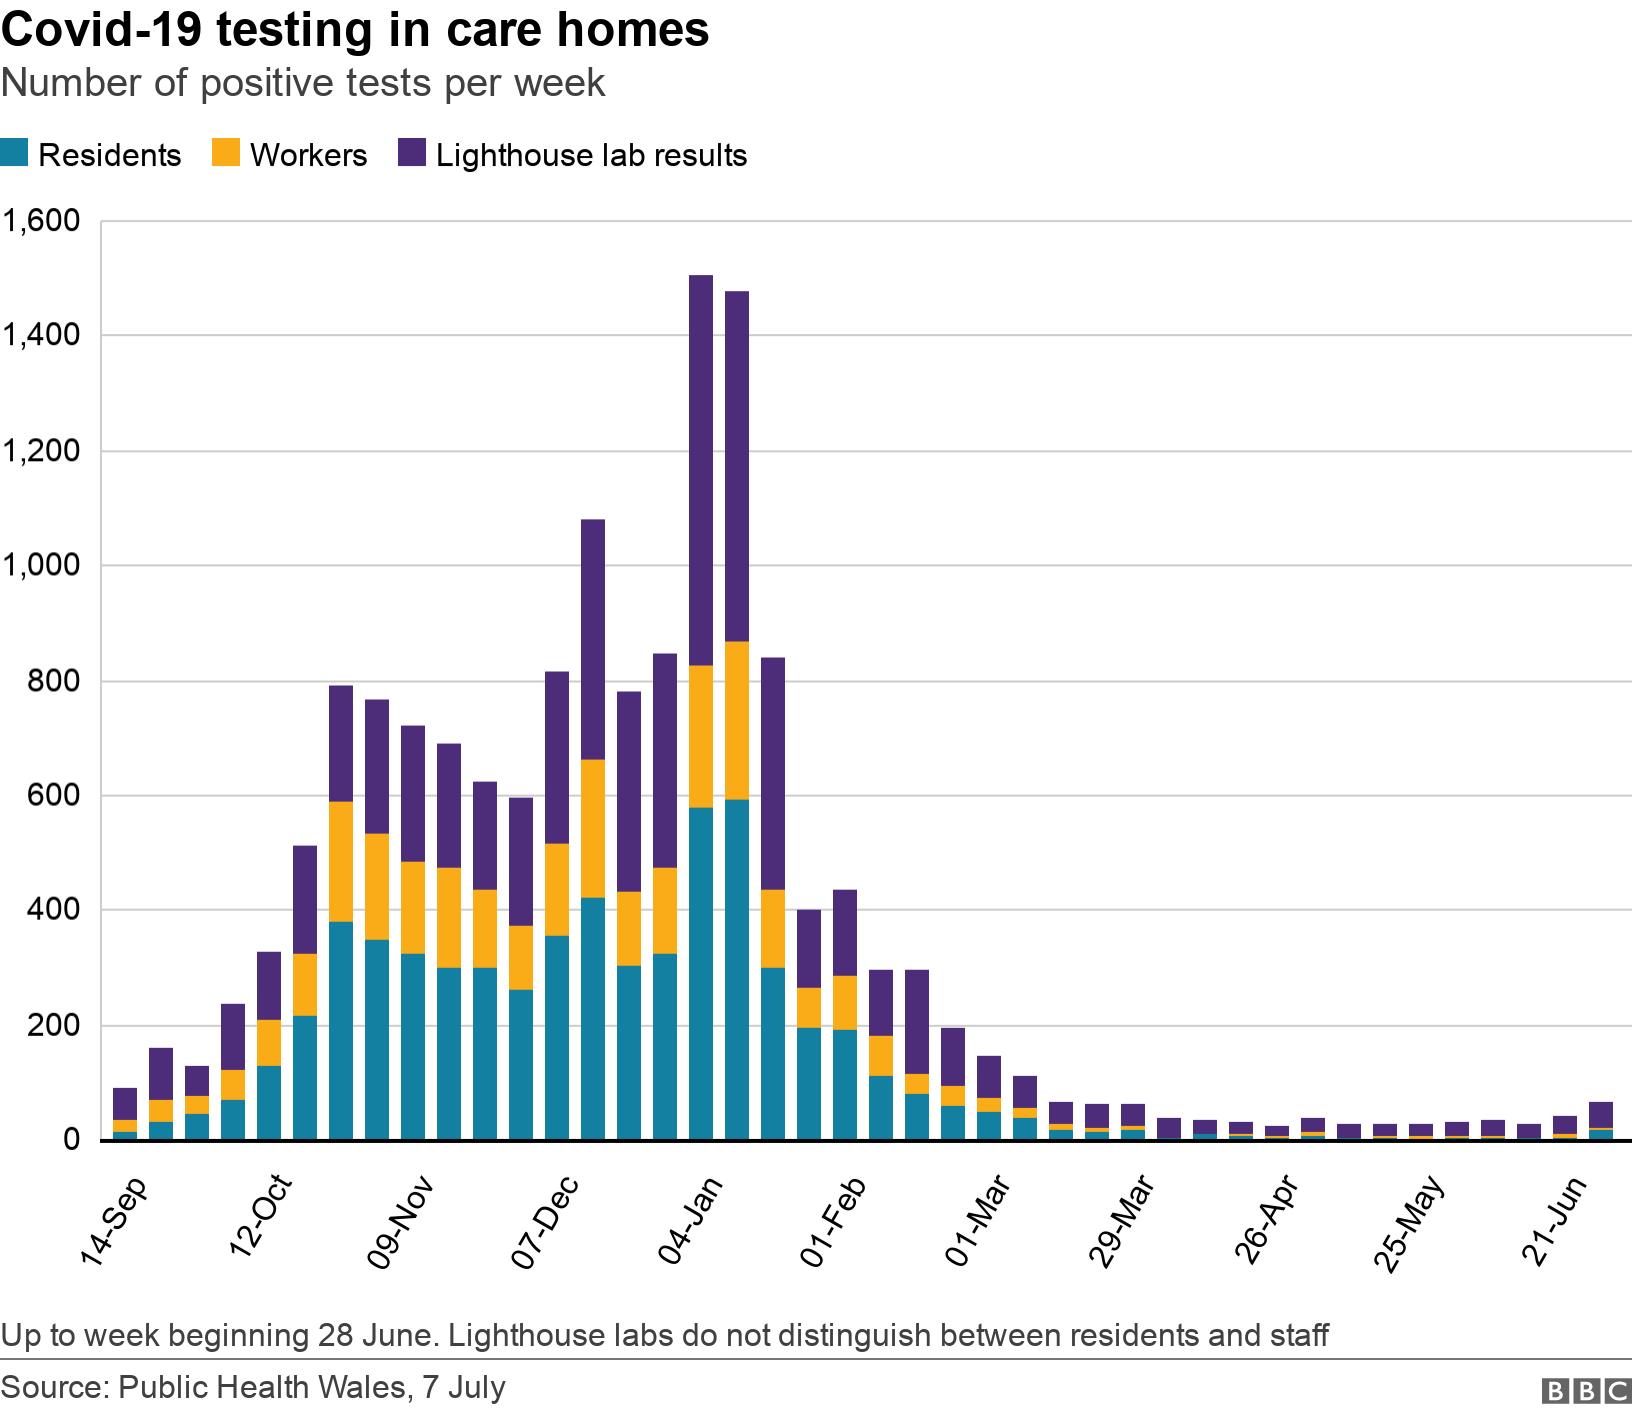 Covid-19 testing in care homes. Number of positive tests per week.  Up to week beginning 28 June. Lighthouse labs do not distinguish between residents and staff.